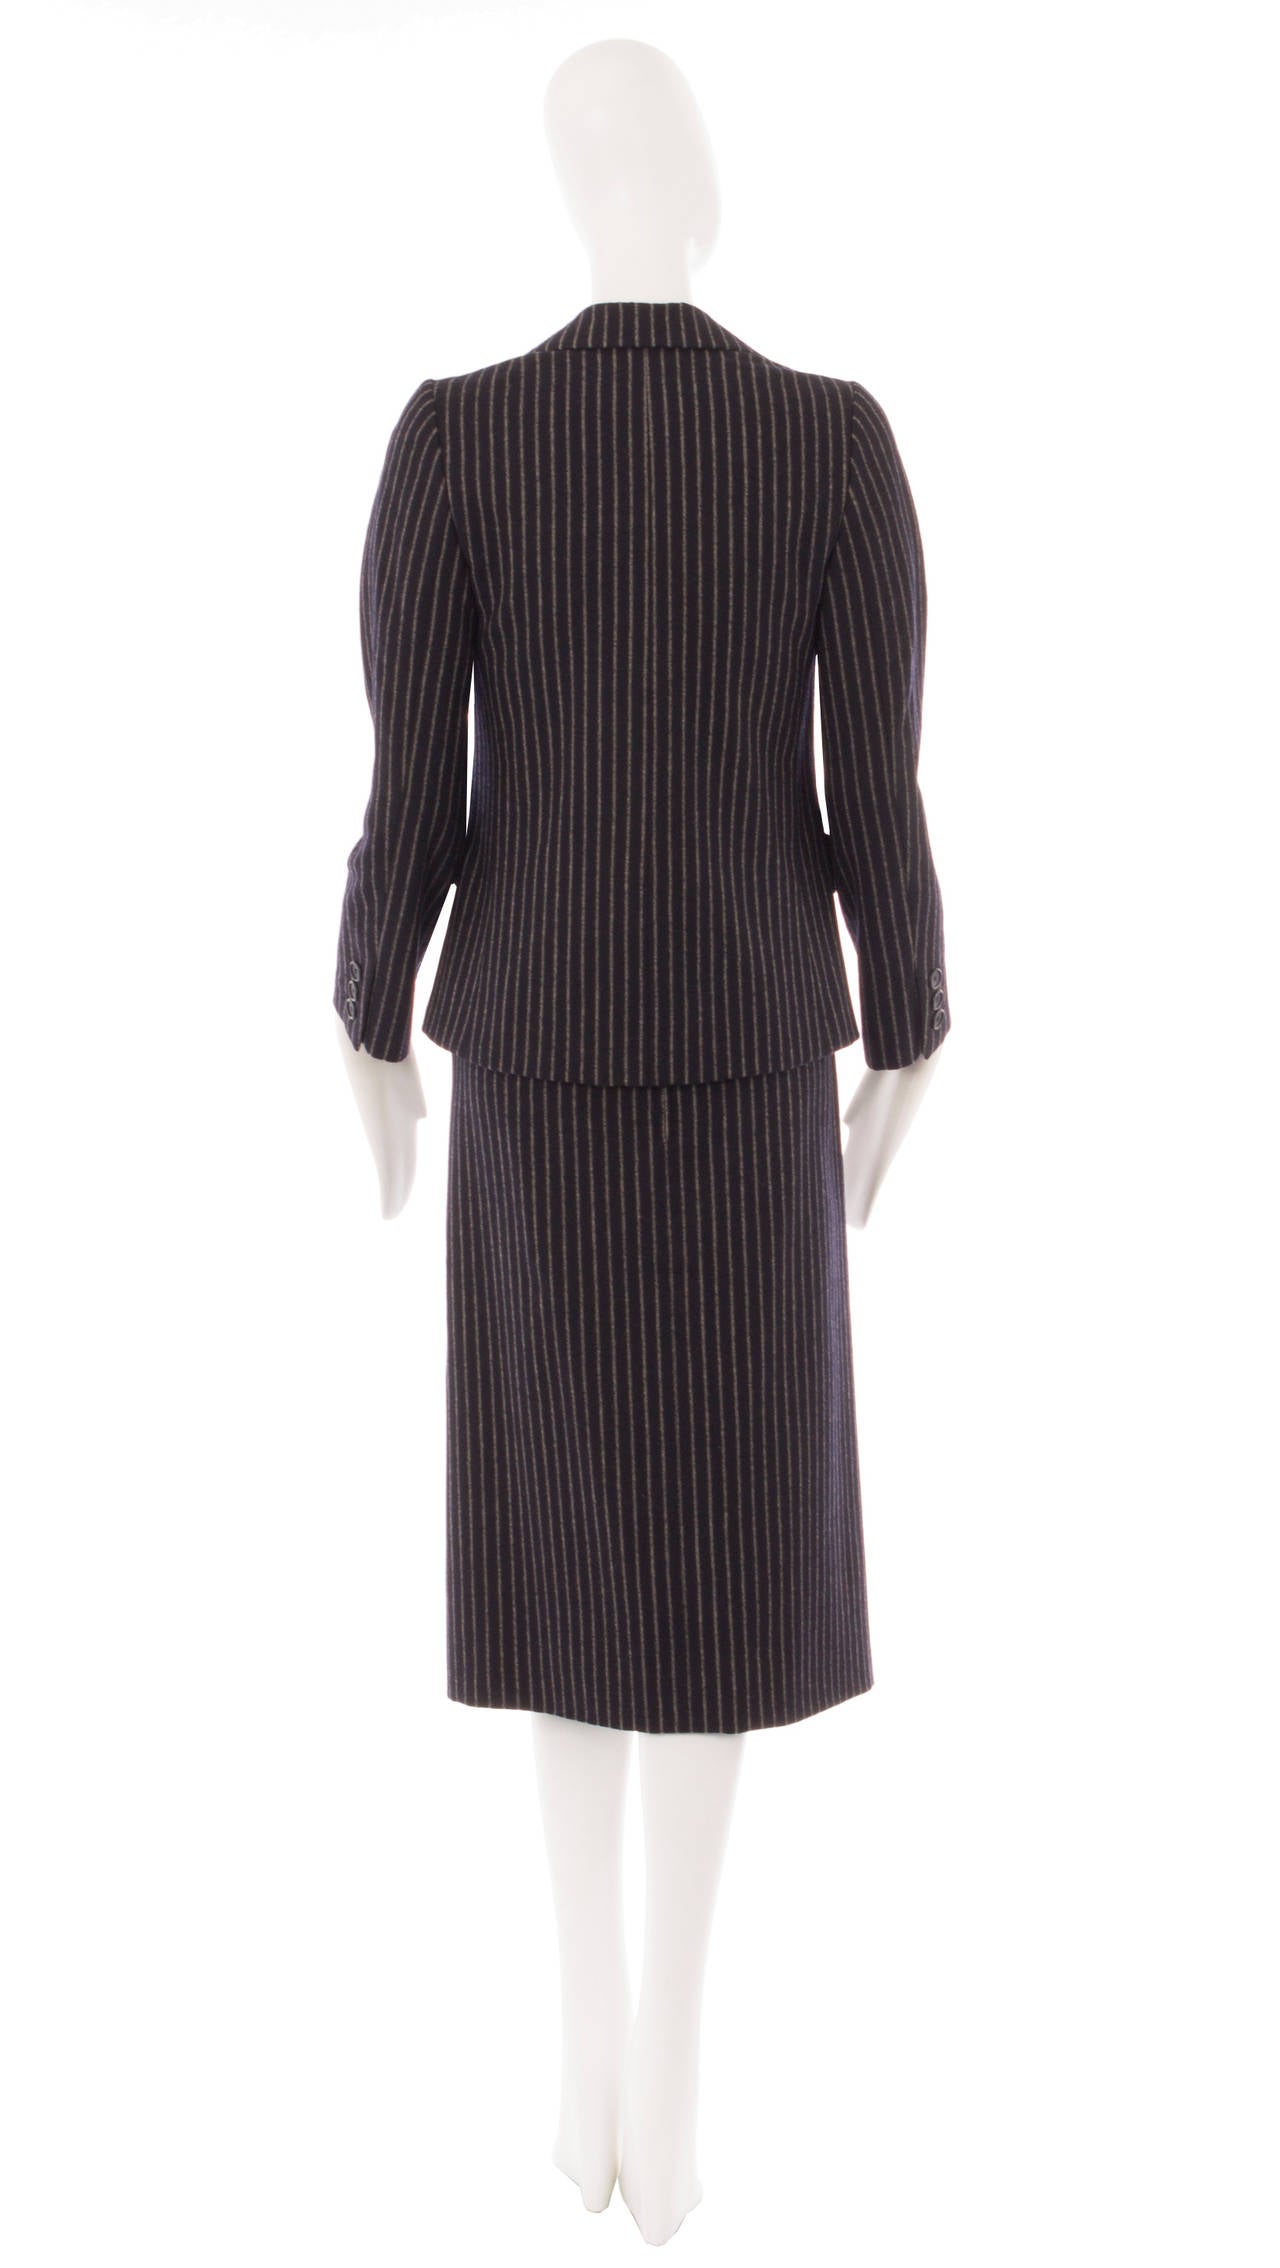 Dior Haute Couture Wool Skirt Suit, Autumn Winter 1974 In Excellent Condition For Sale In London, GB